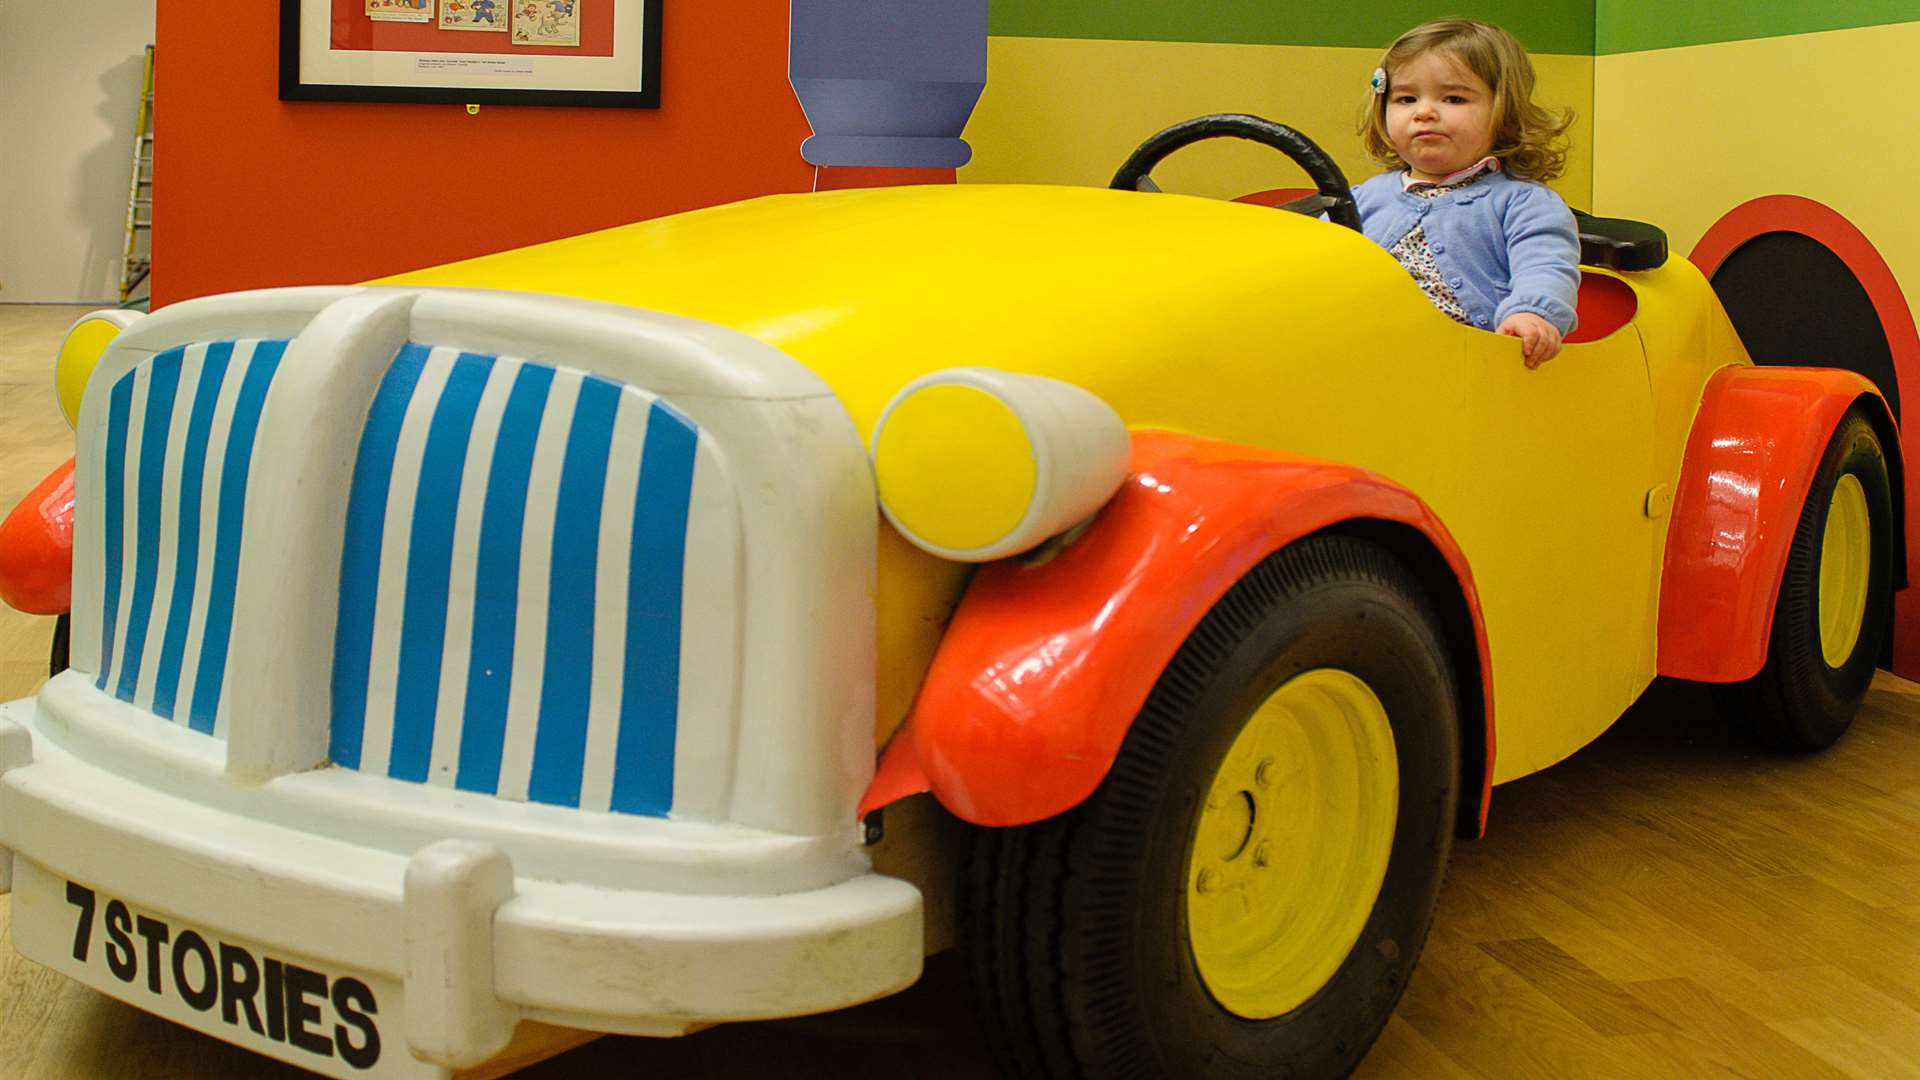 Youngsters will love riding in Noddy's car